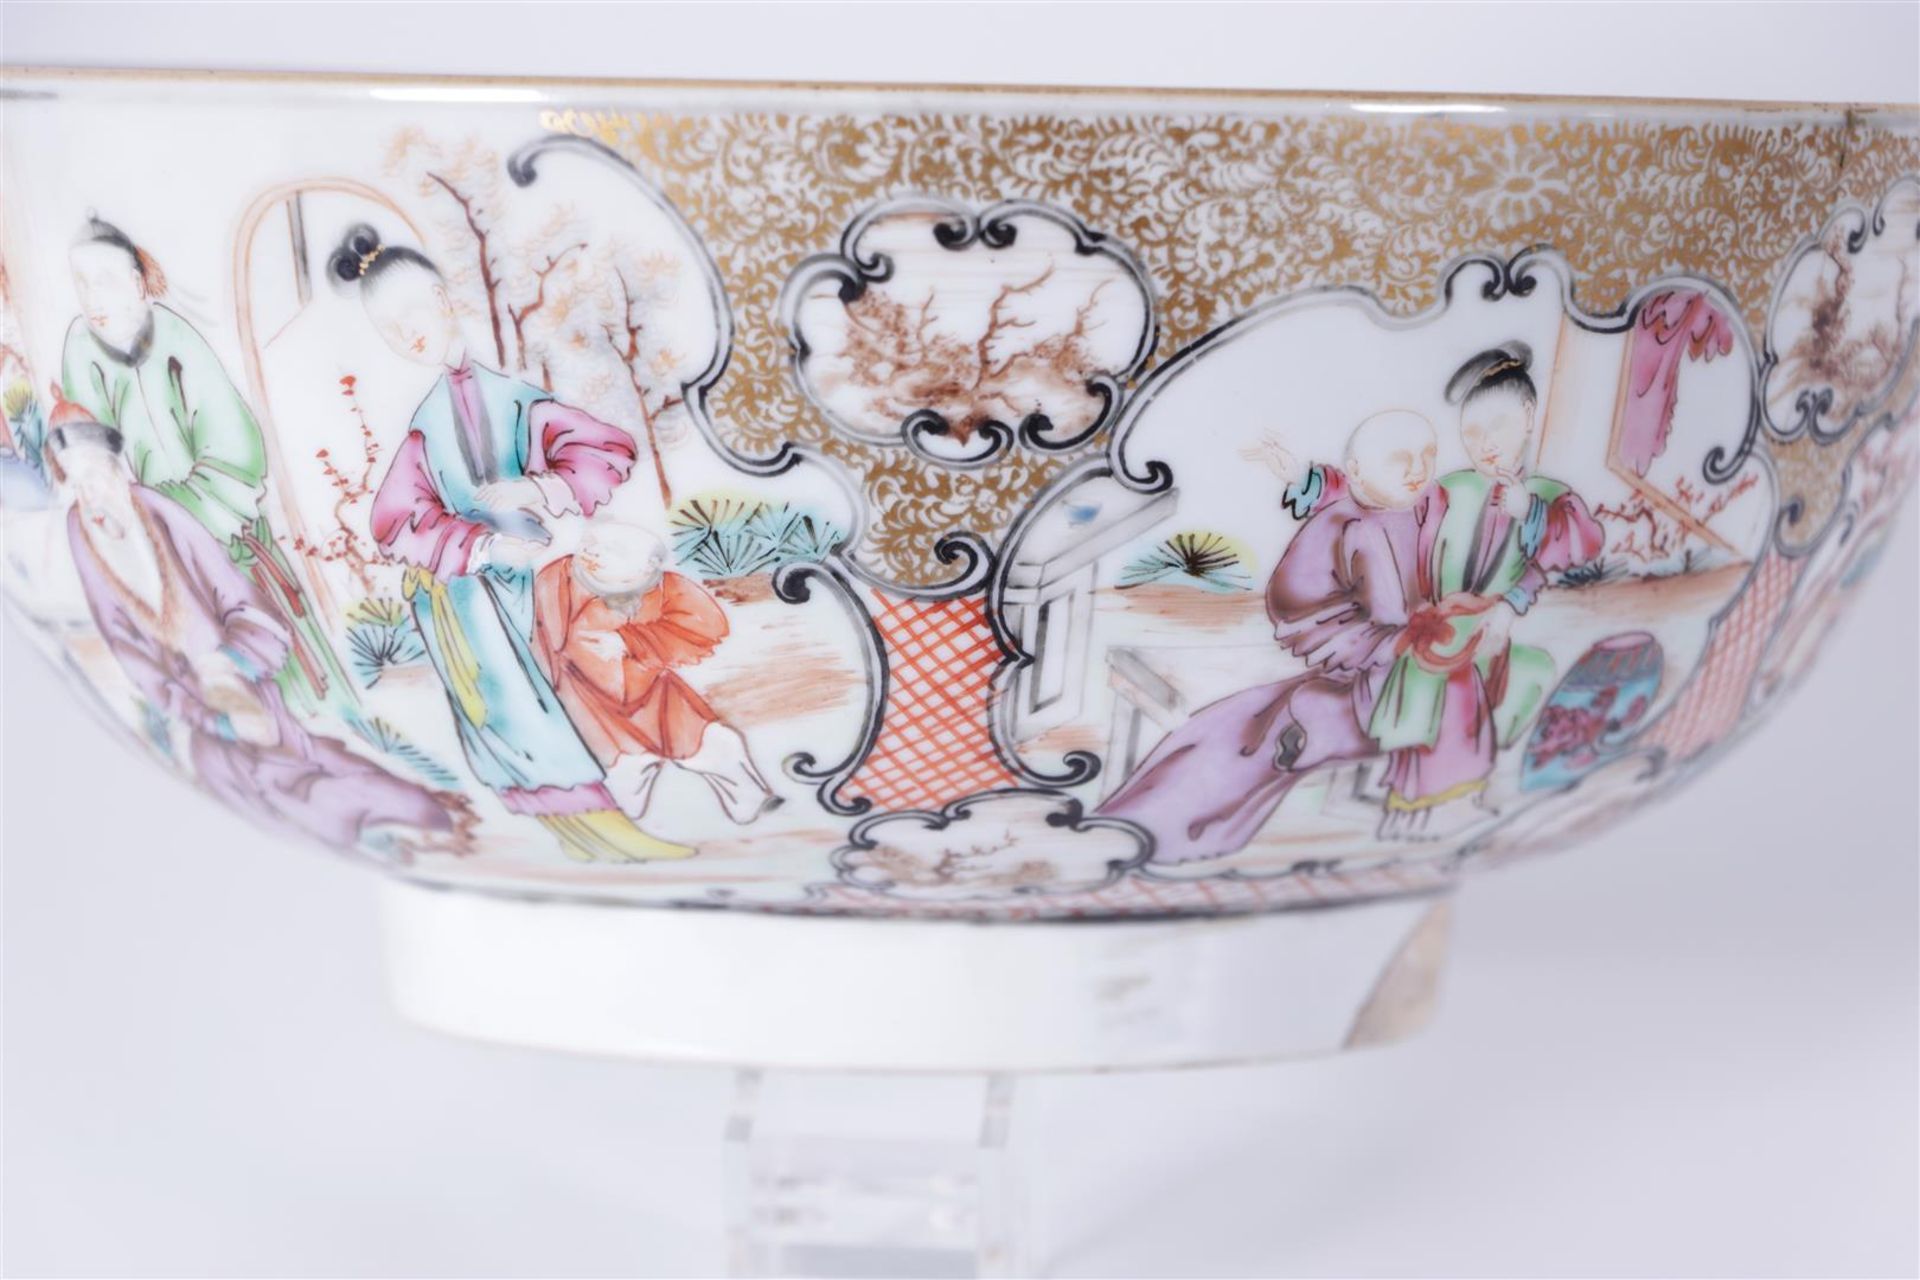 A large Chine de comdande bowl decorated with various figures. China, 18th century.
Diam. 26 cm. - Image 5 of 5